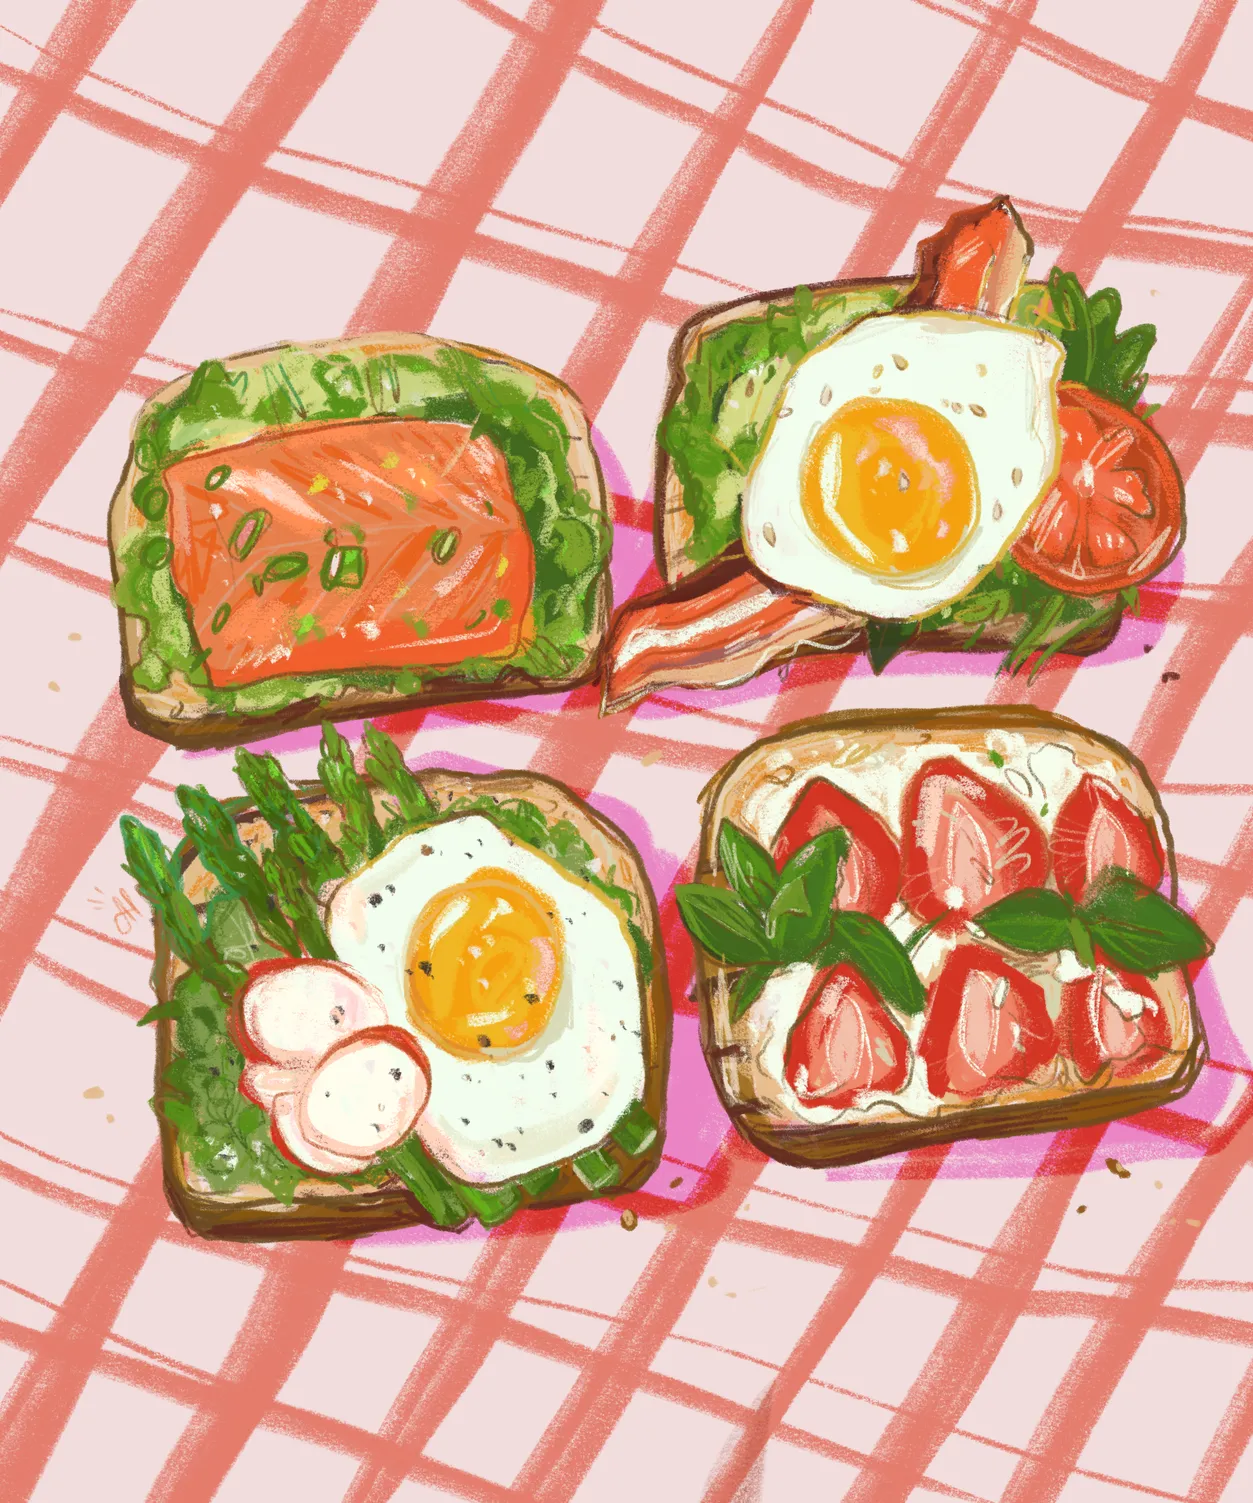 a vividly colored digital illustration depicting four sandwiches laying on the table with different ingredients on top: one with salmon and guacamole, one with egg, bacon and salad, one with egg, asparagus and horseradish, one with strawberries, basil and cream cheese